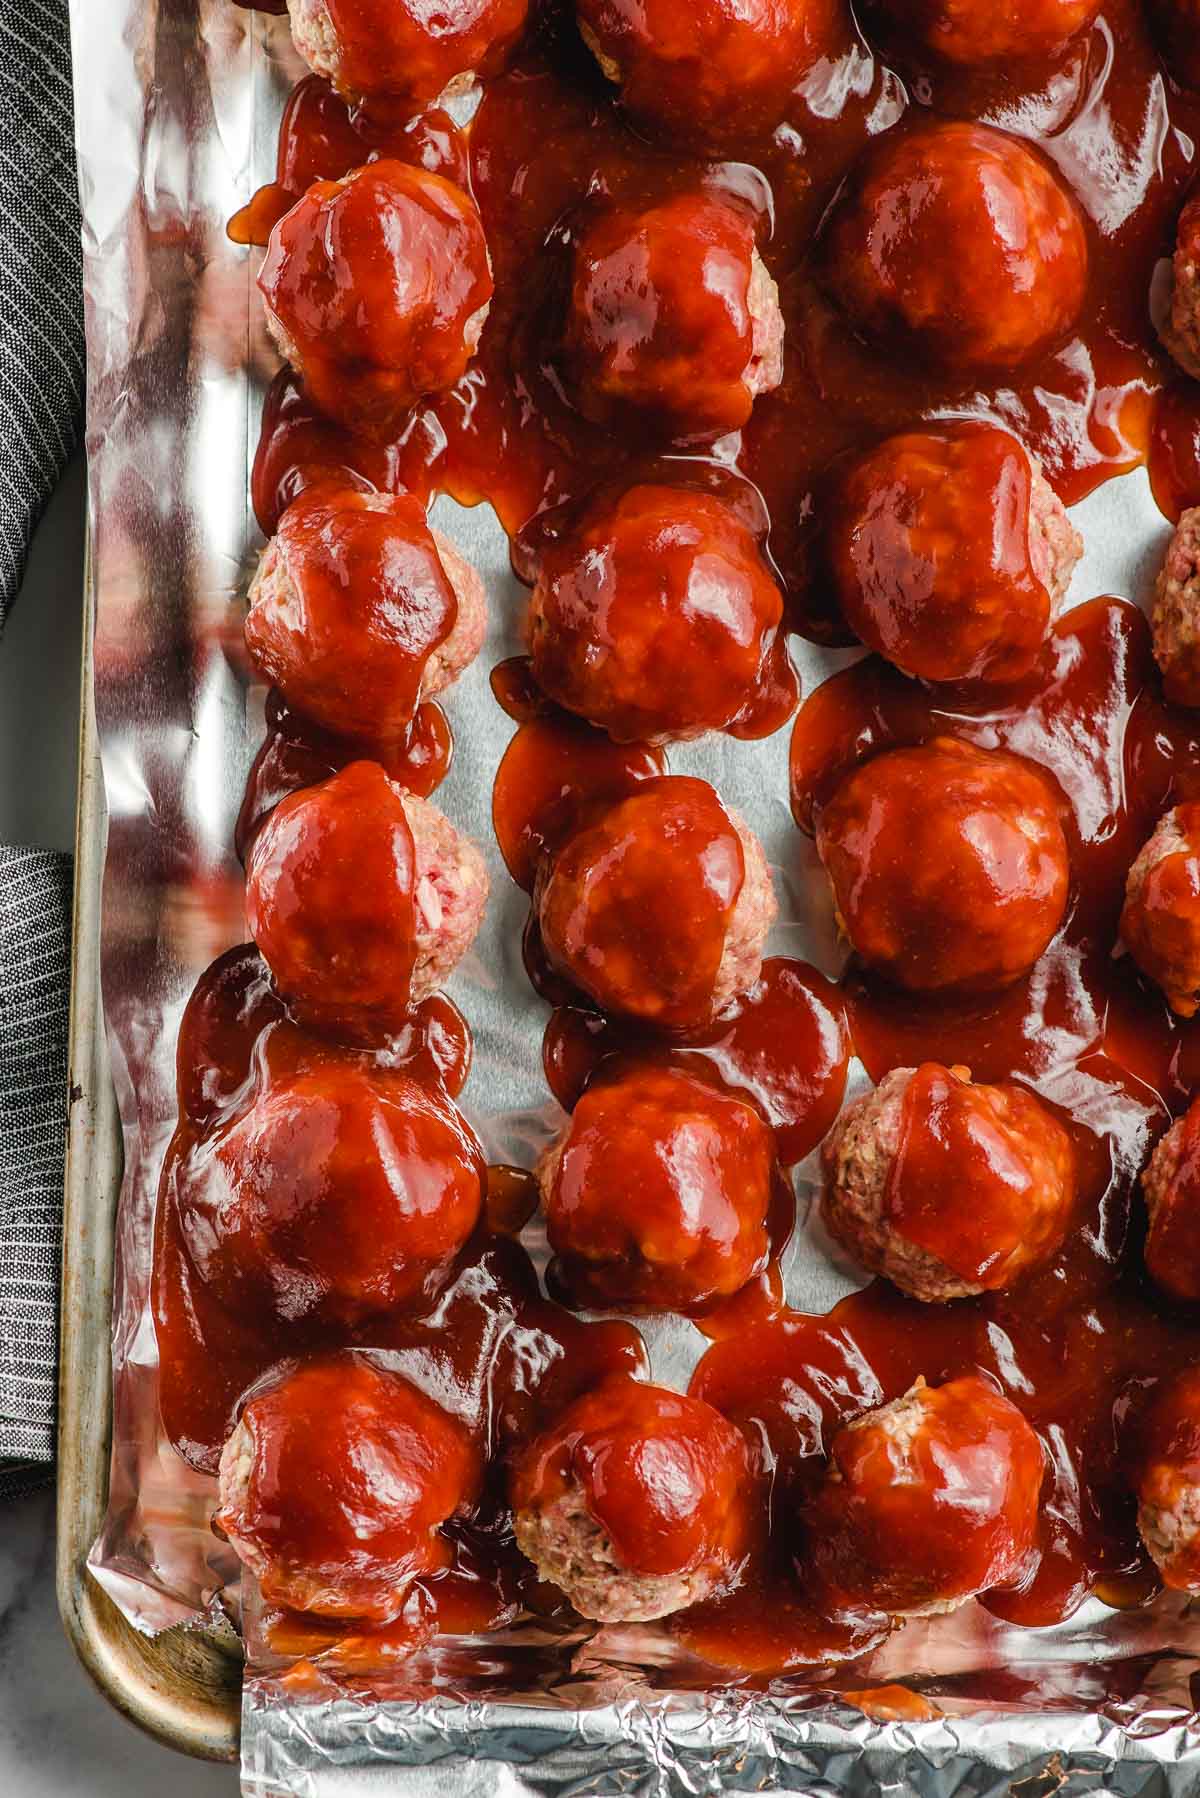 Unbaked meatballs covered in barbecue sauce on a baking tray.